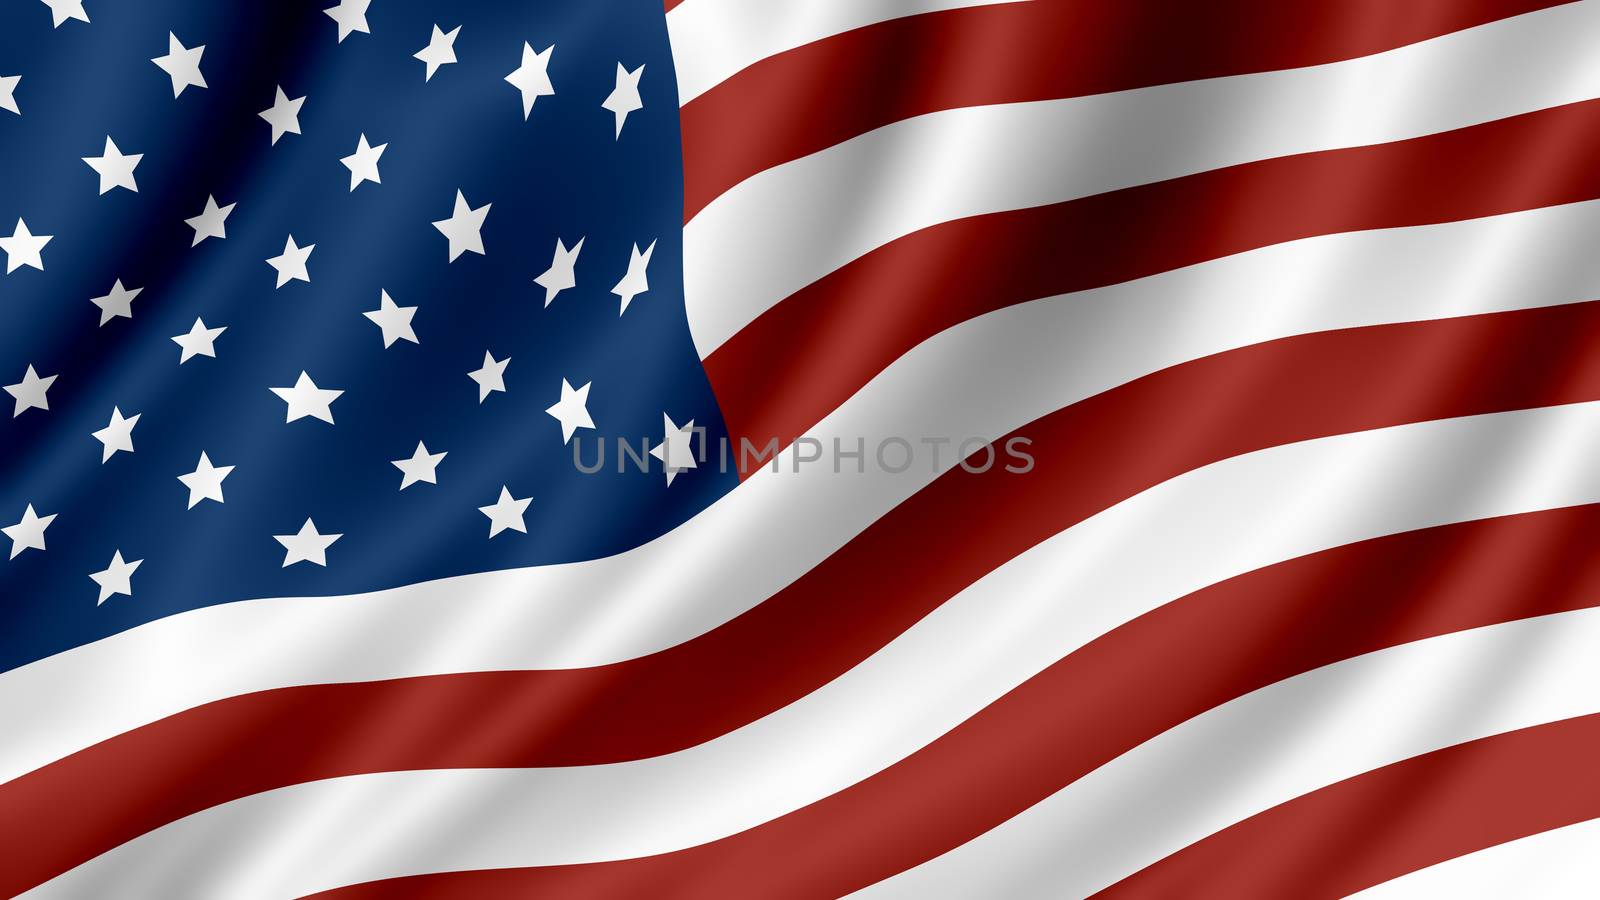 USA or American flag background by Myimagine